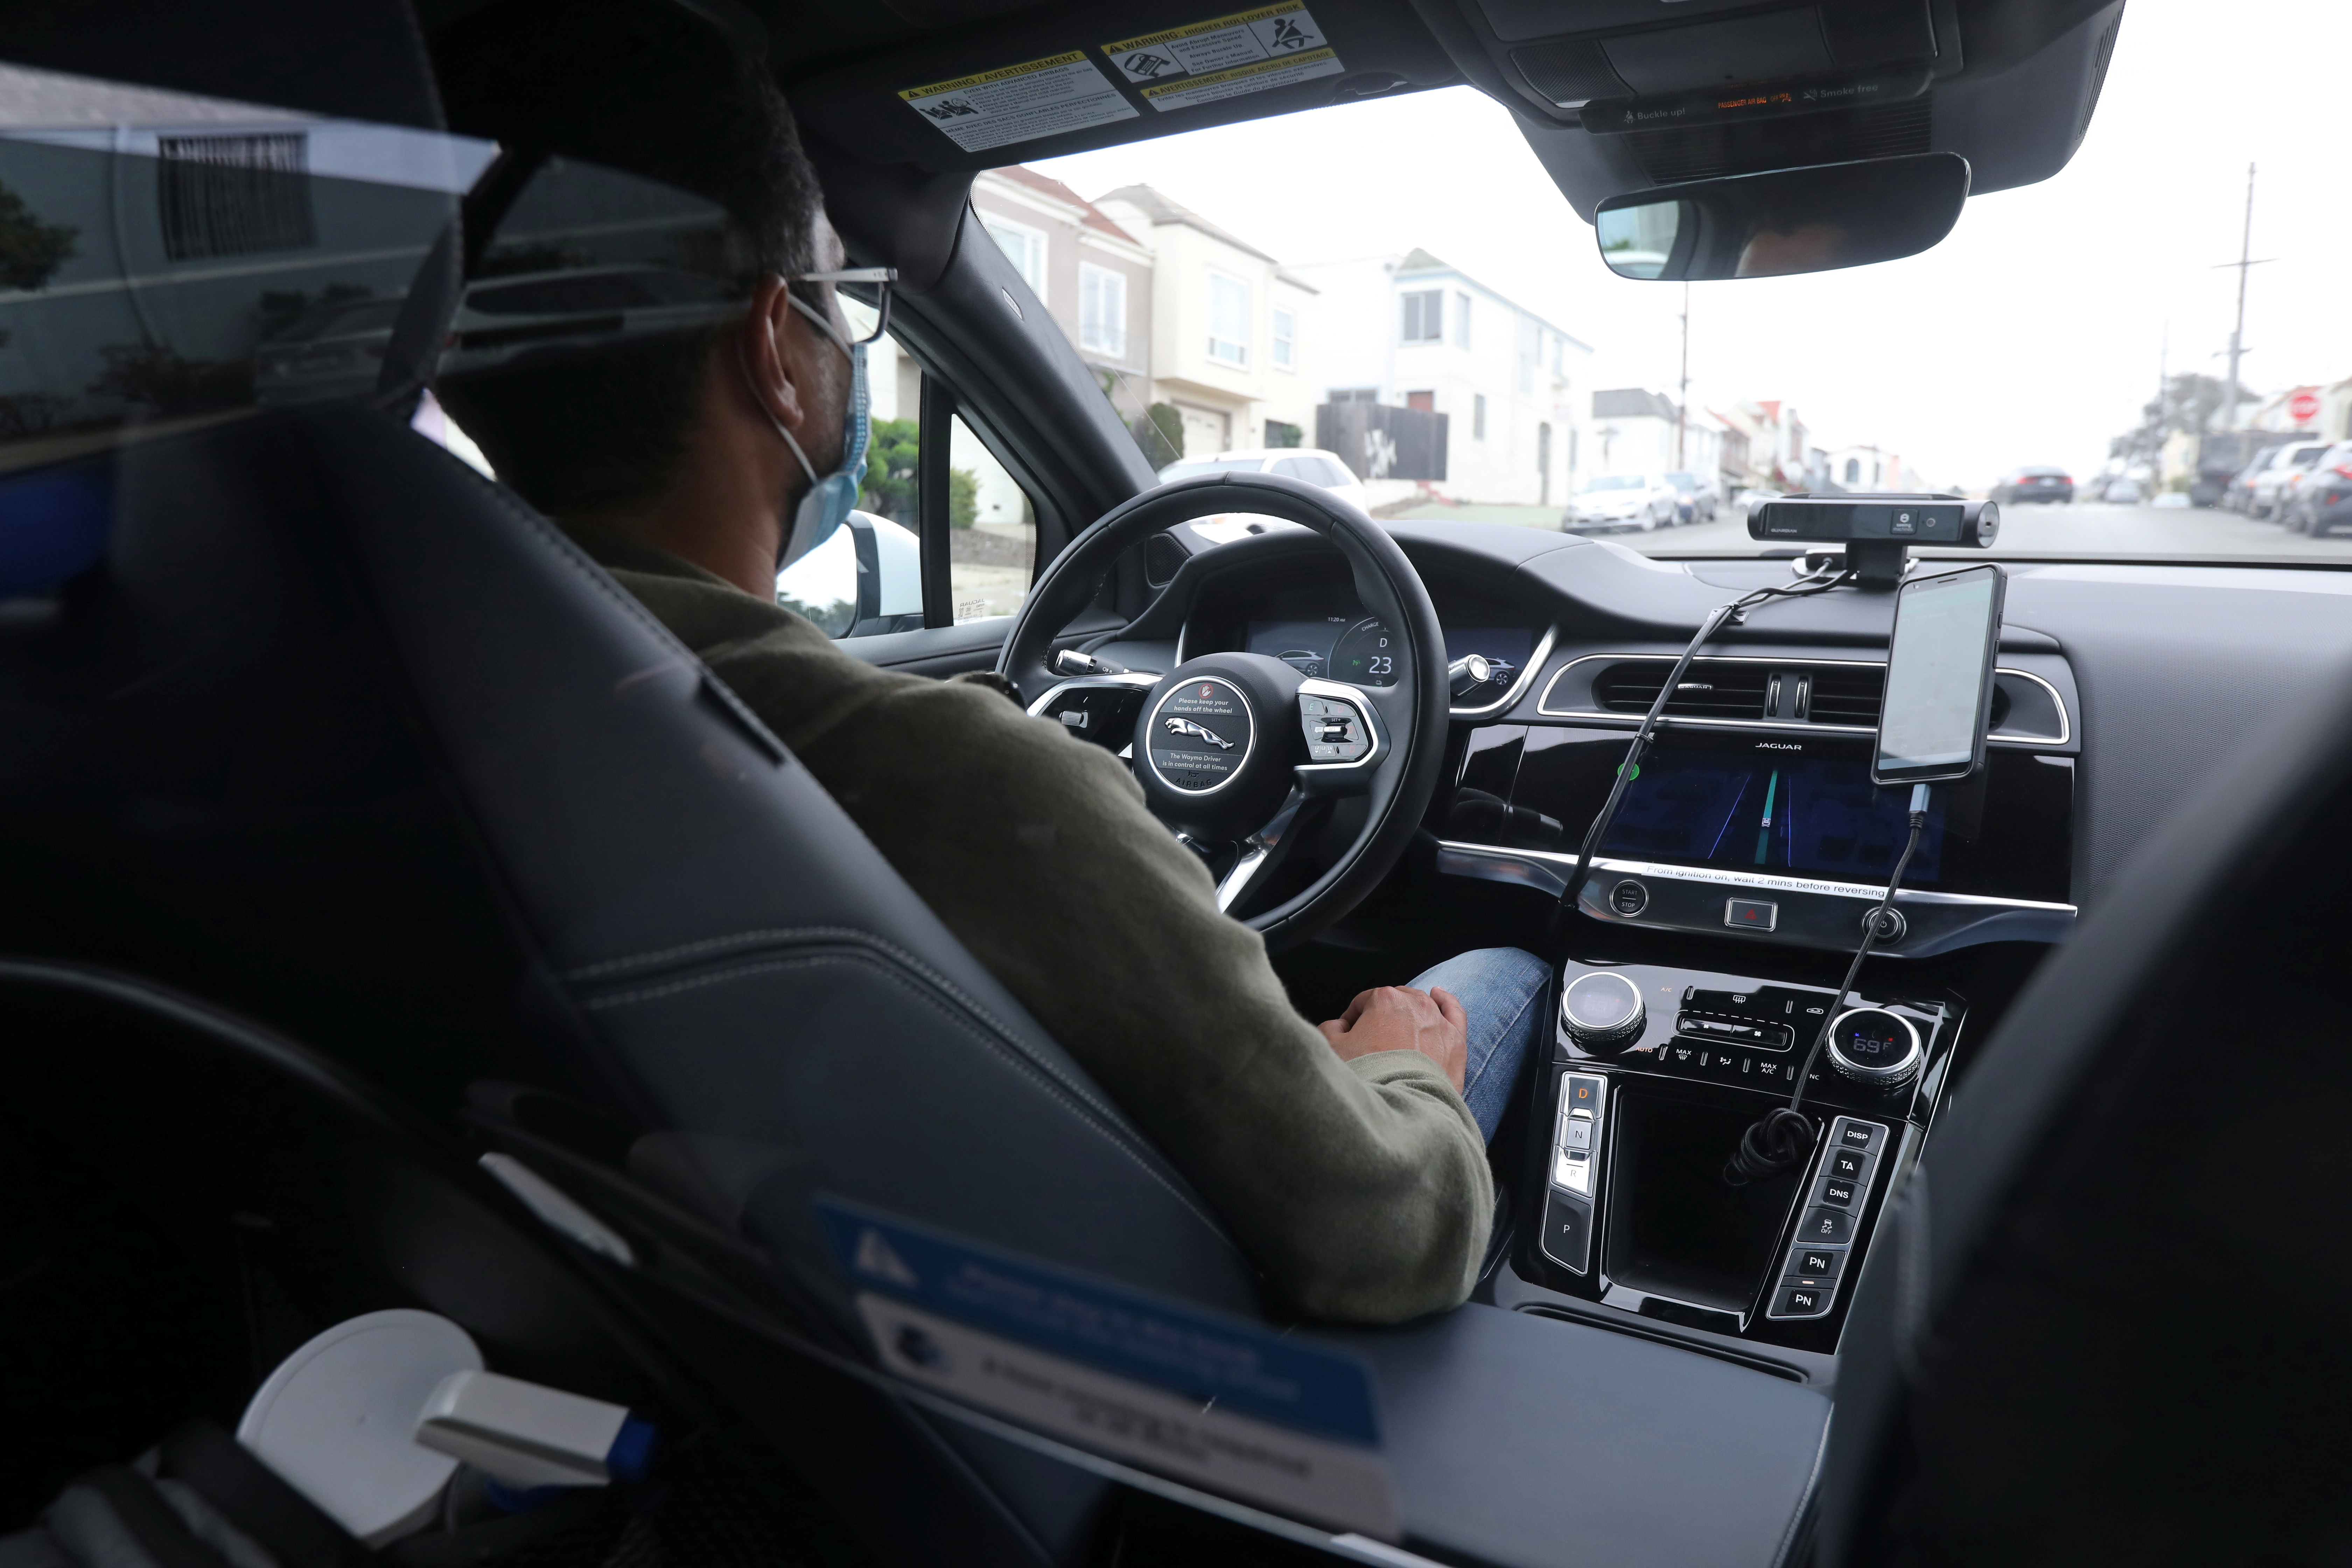 A safety operator is seen in the front seat of a self-driving Waymo vehicle in San Francisco, California, U.S. August 20, 2021. Picture taken August 20, 2021. REUTERS/Nathan Frandino